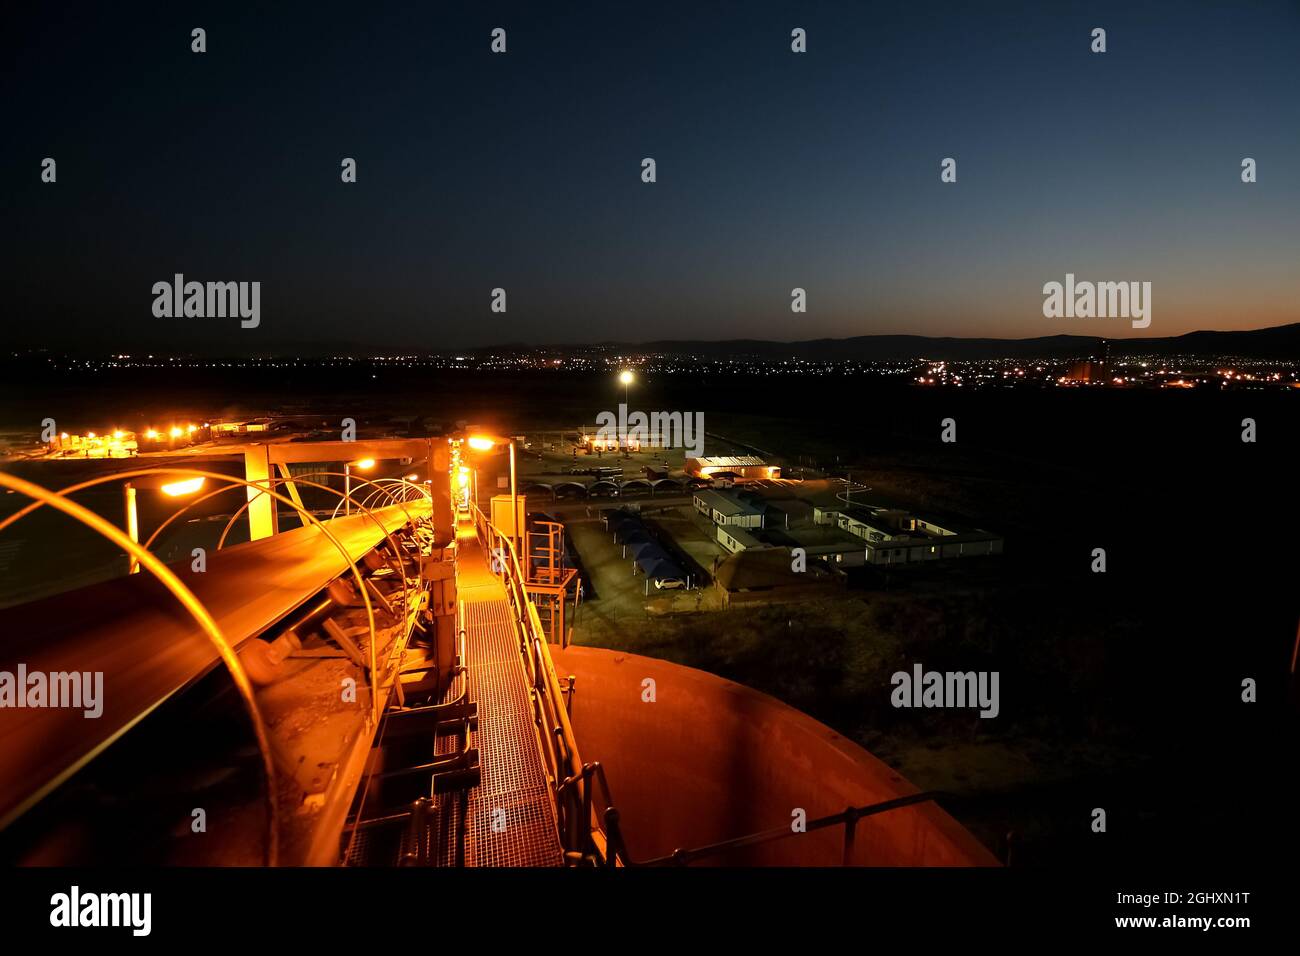 JOHANNESBURG, SOUTH AFRICA - Aug 05, 2021: A conveyor belt for transporting ore rocks at precious metal mines in Johannesburg Stock Photo